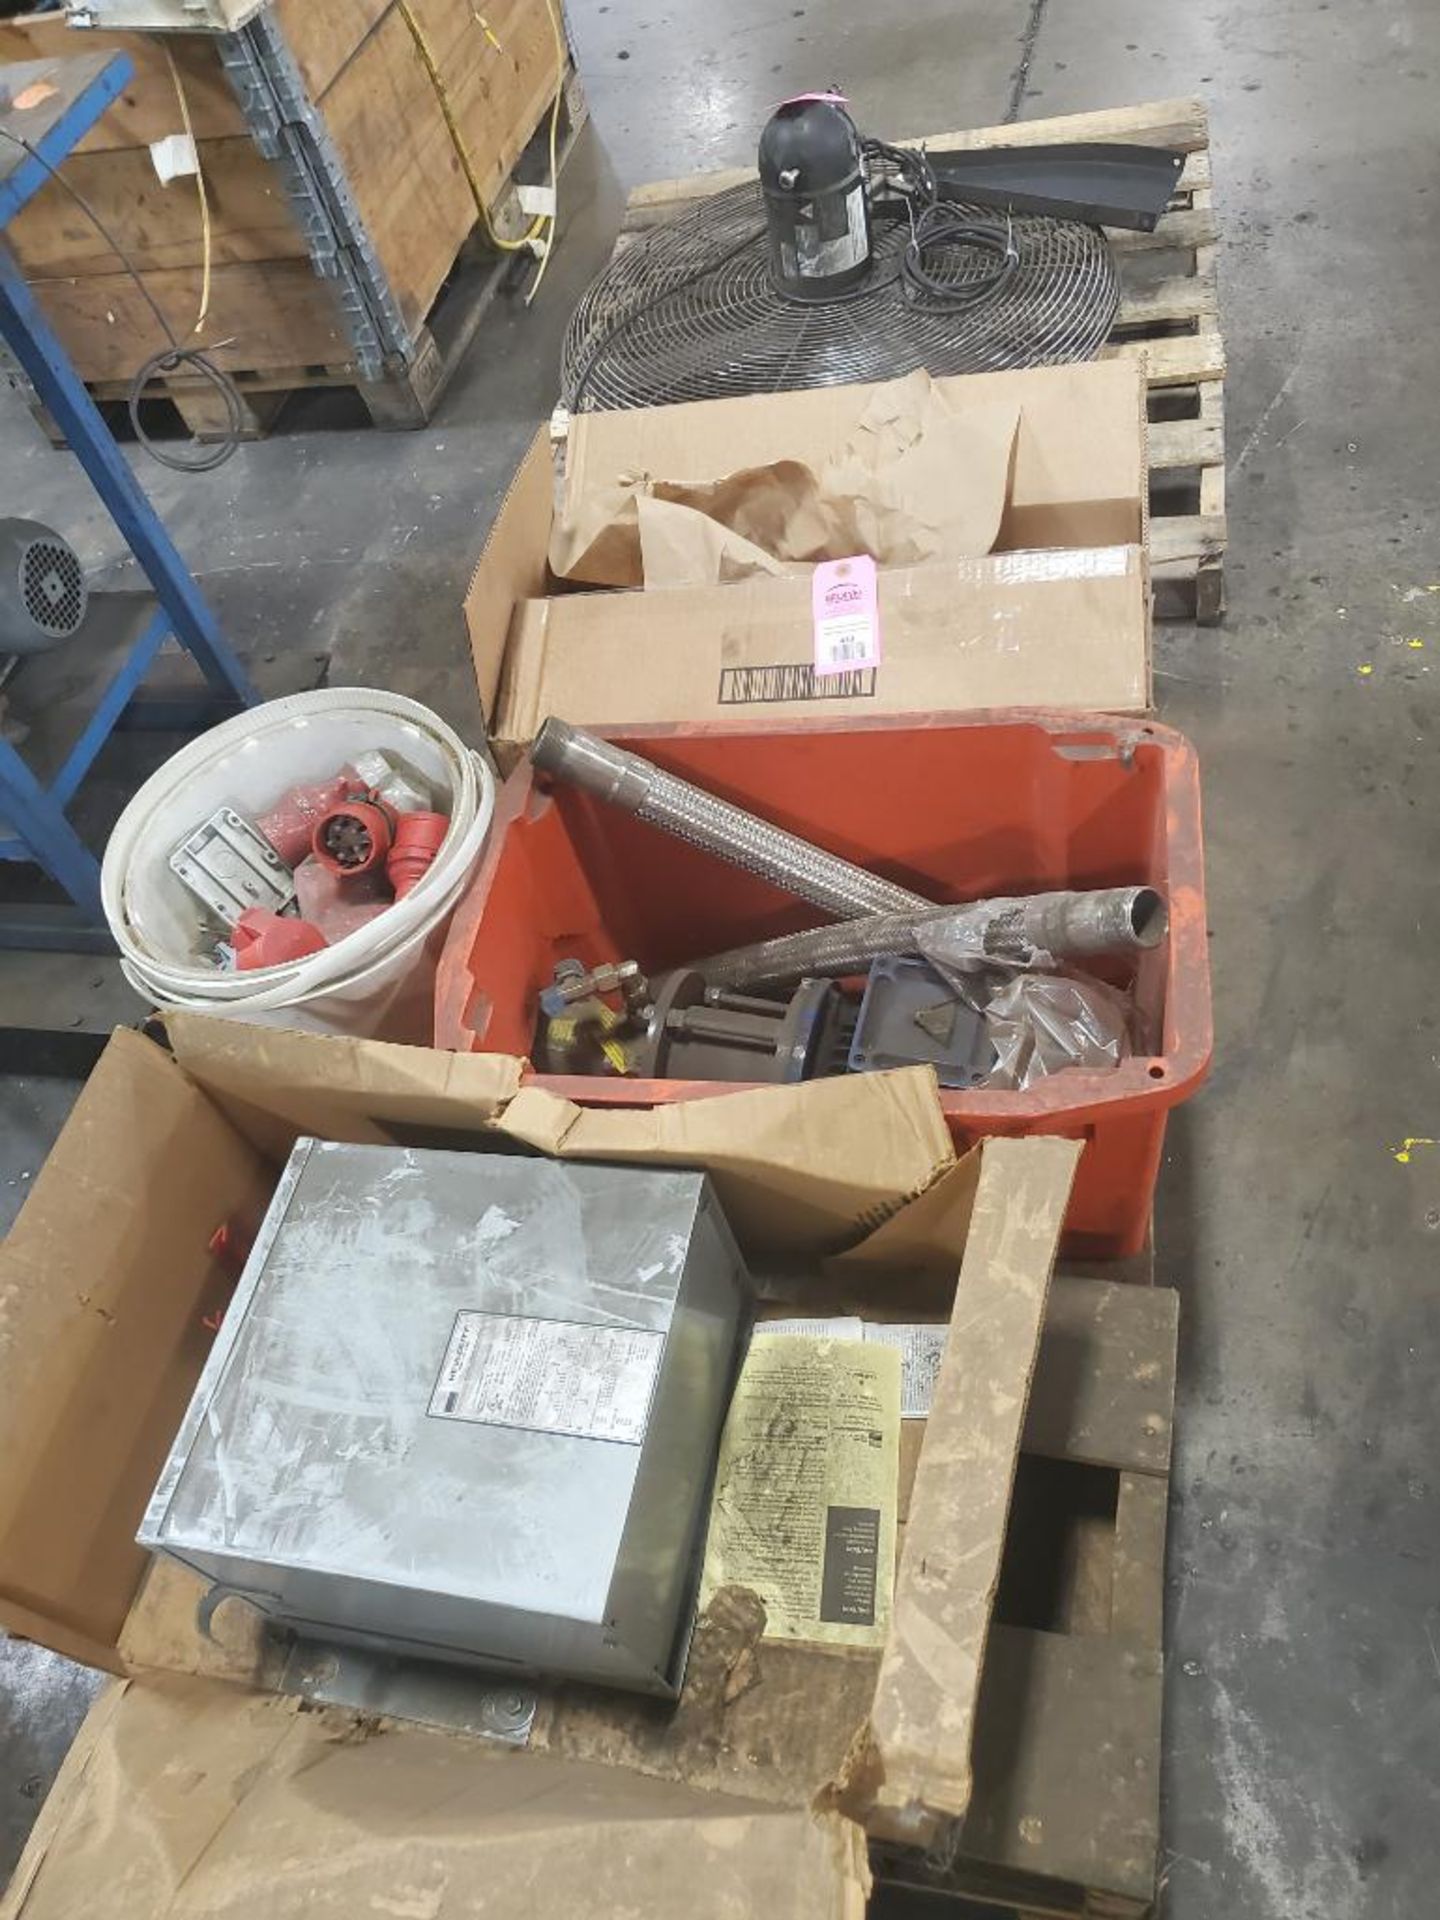 Assorted replacement parts transformer, pump, air line equipment.